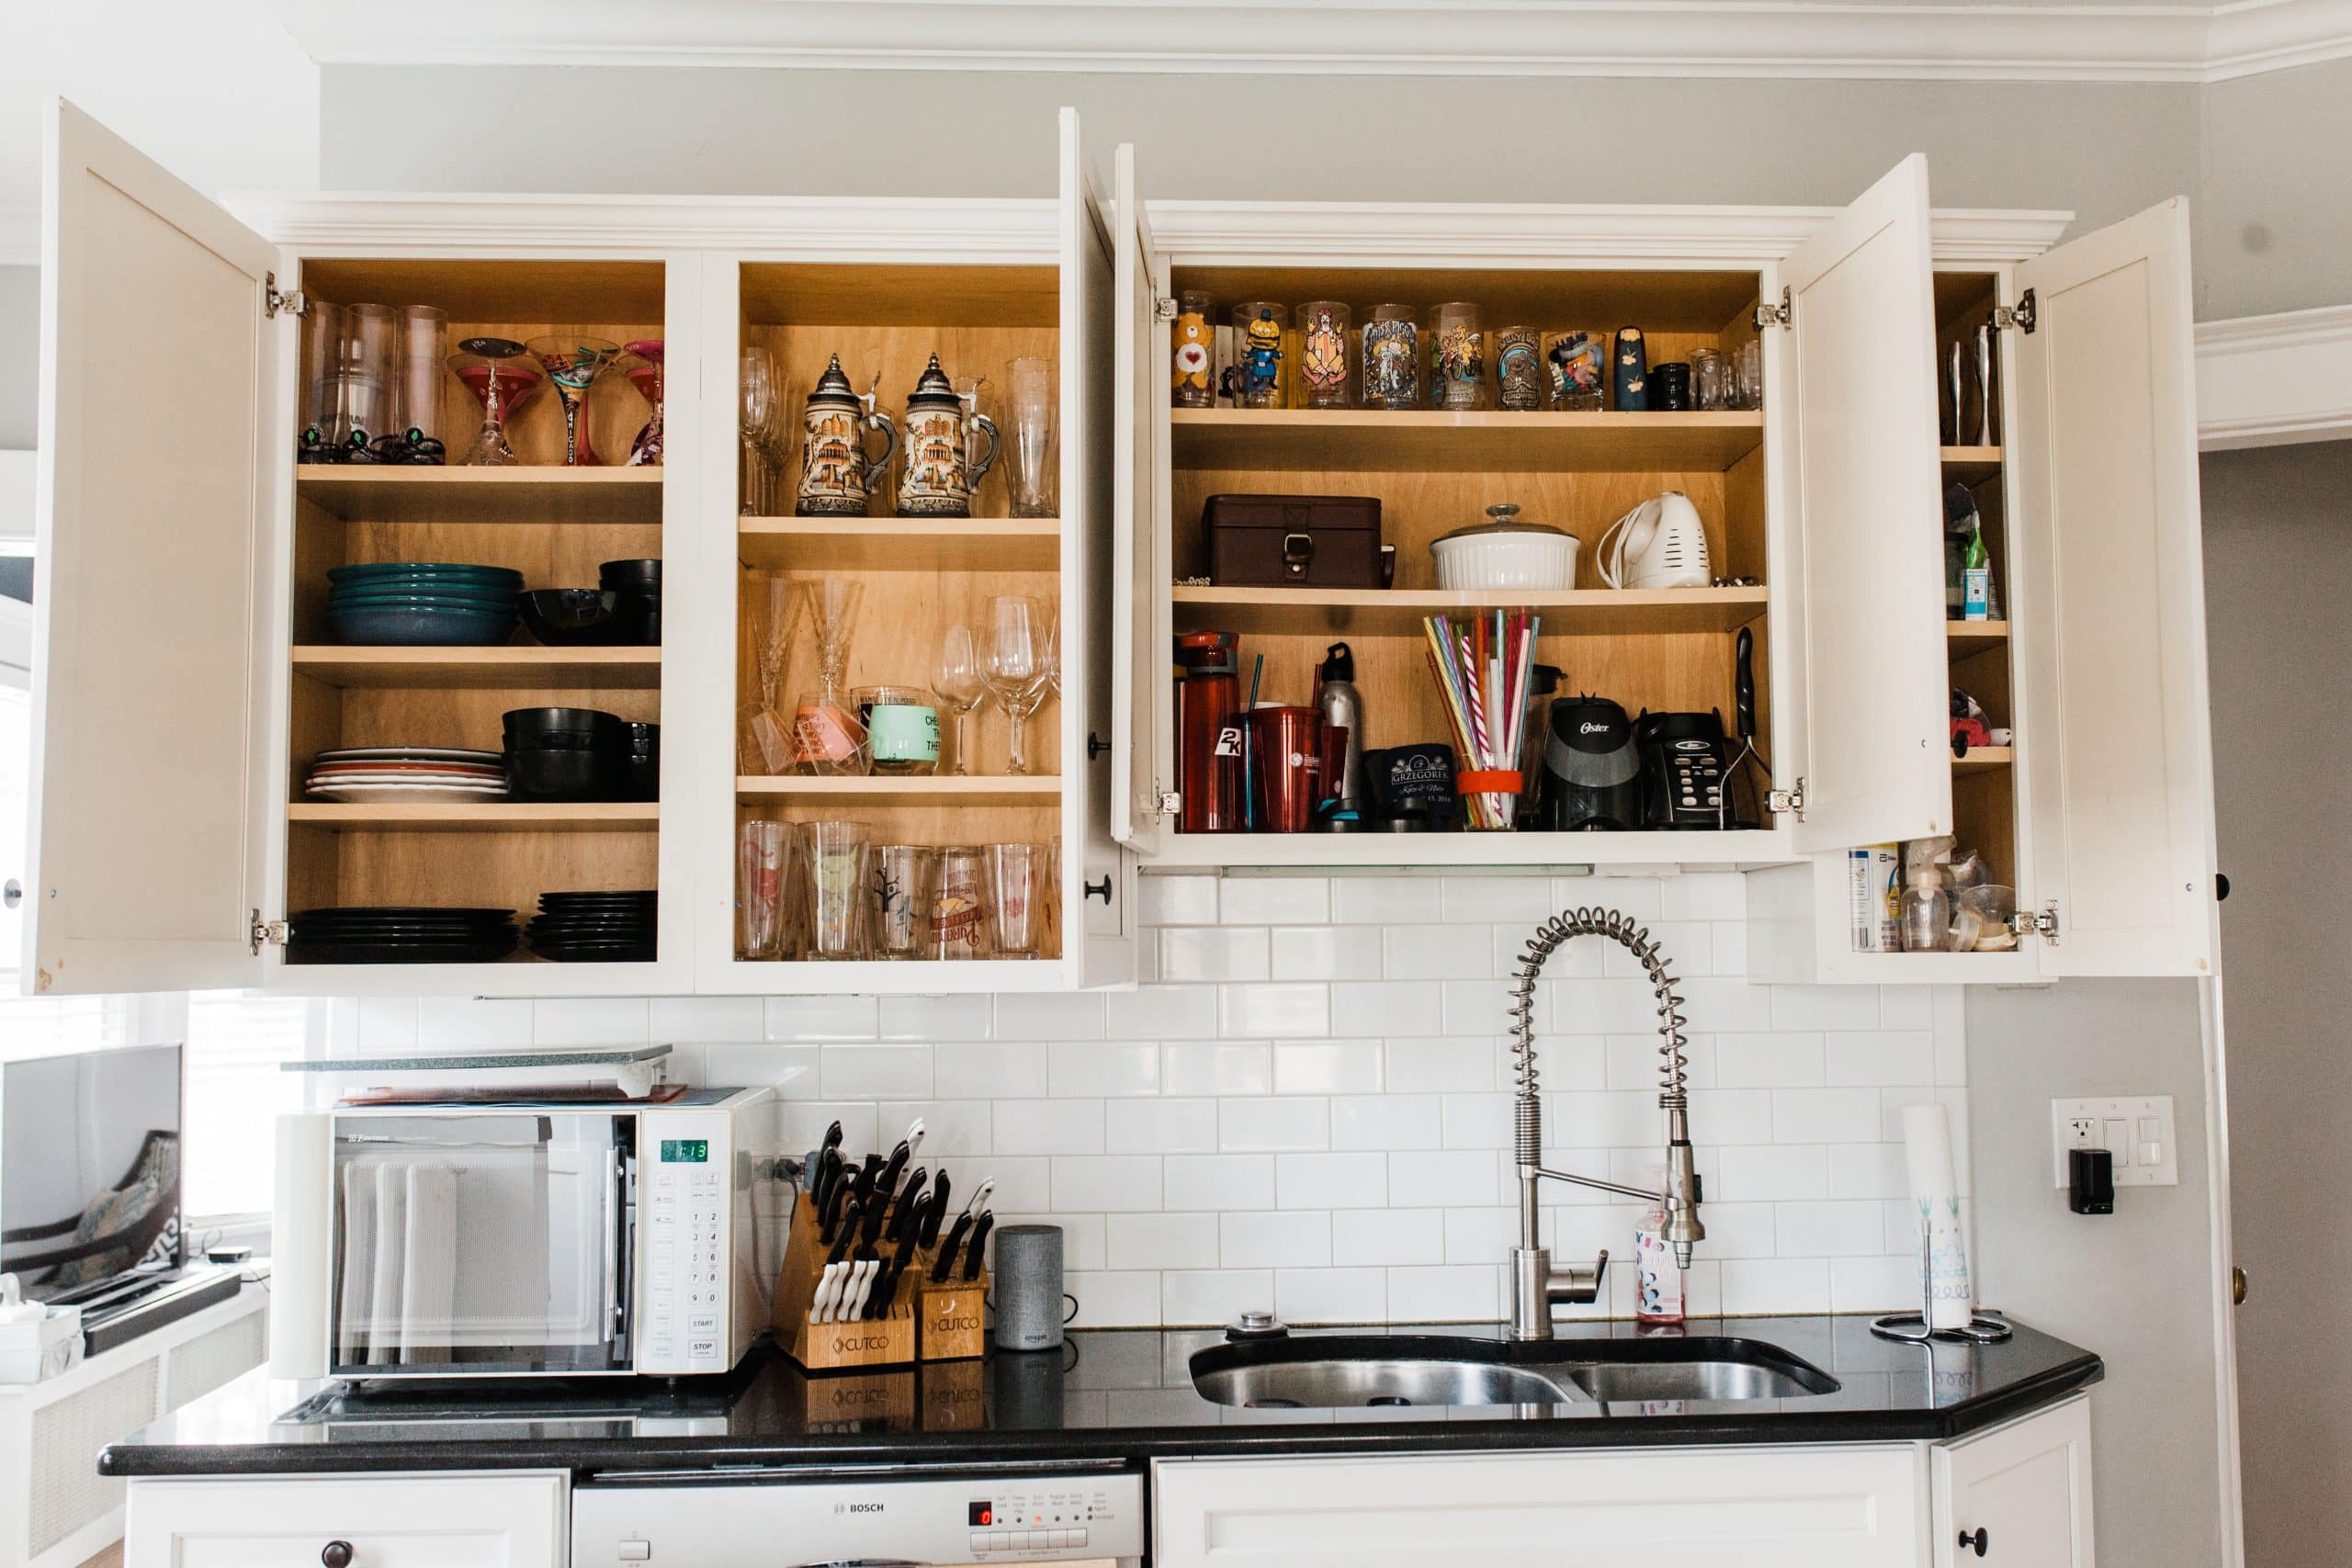 picture of kitchen cabinets with doors open and shelves beautifully organized